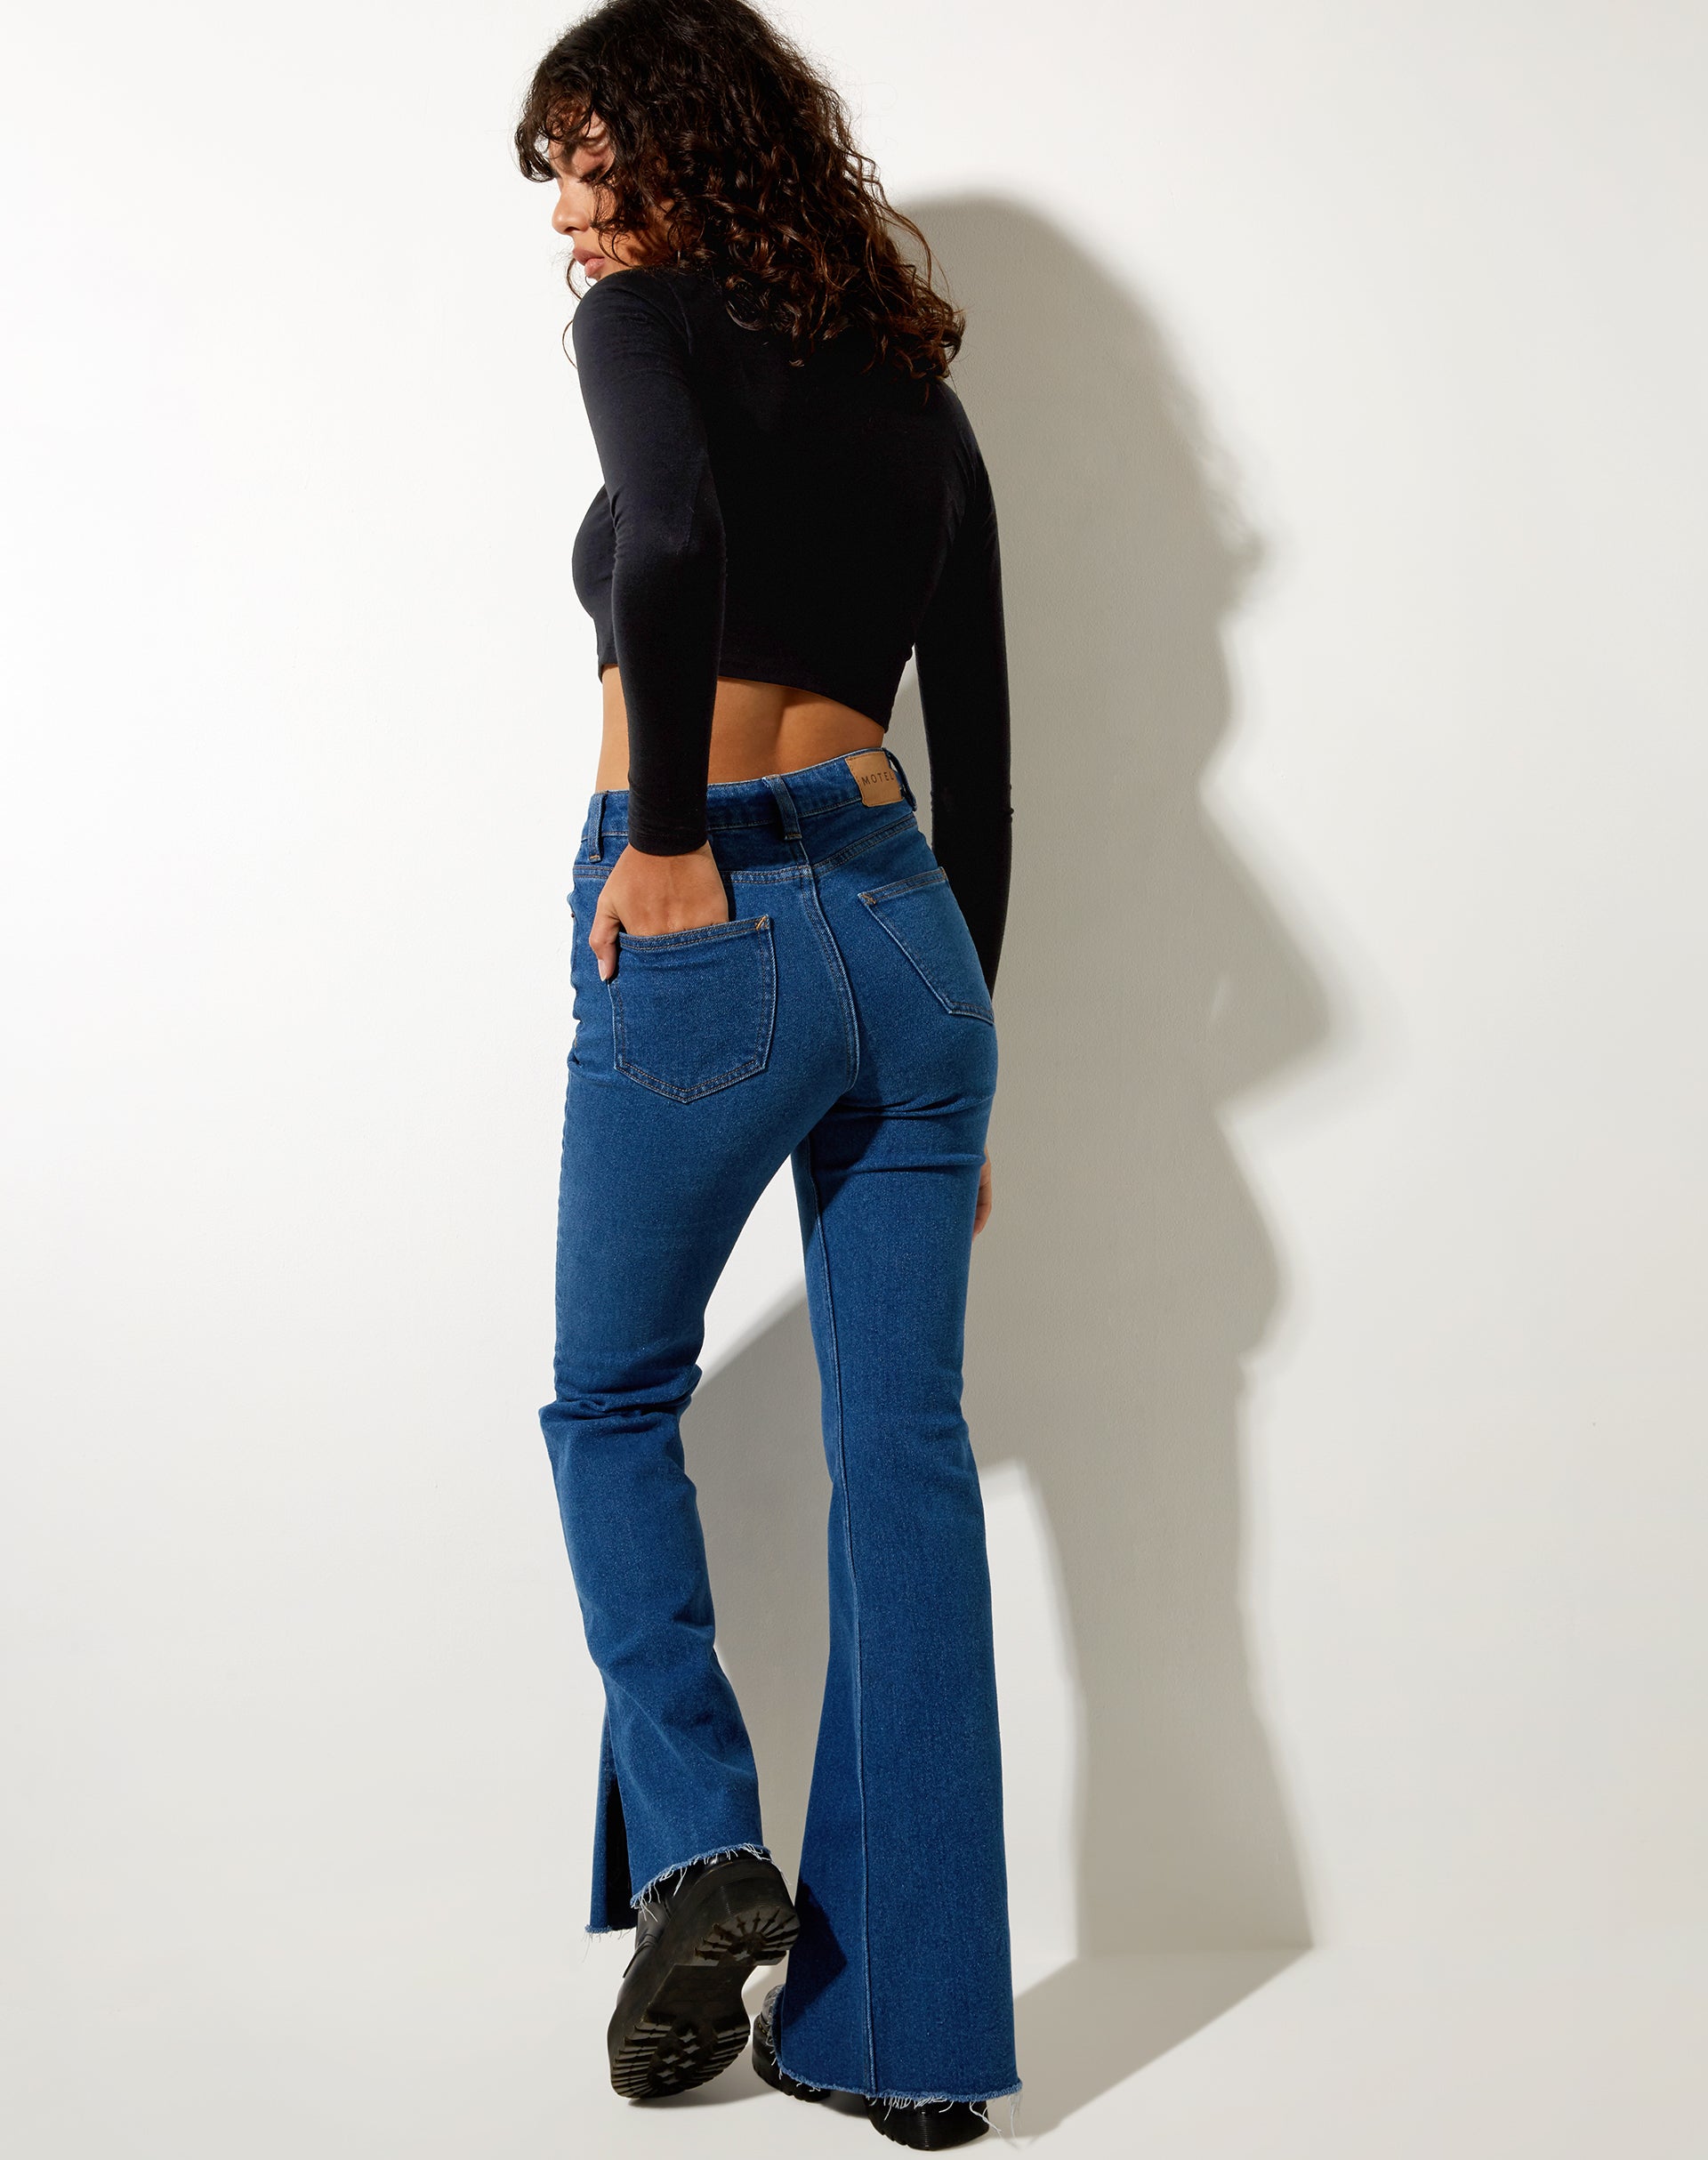 Low Rise Bootleg Jeans in Cord Navy